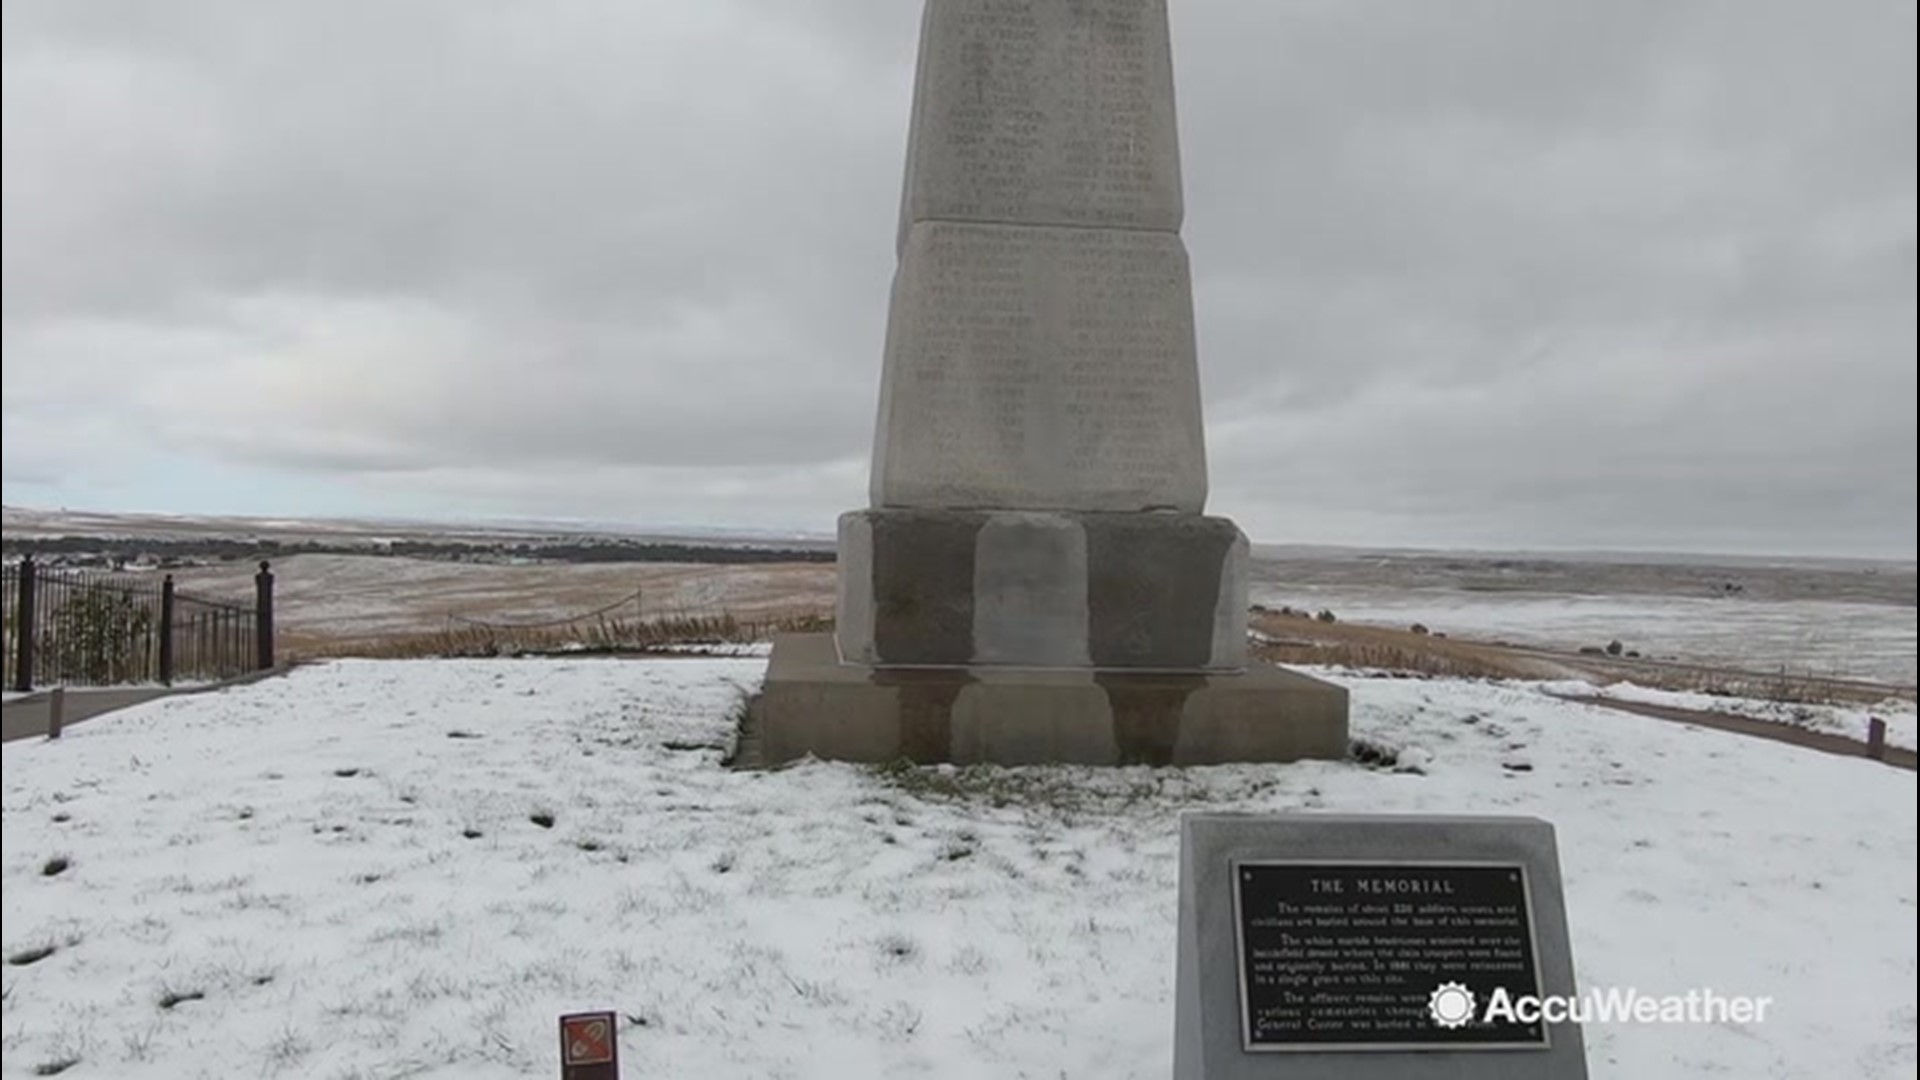 On Oct. 10, about 4 inches of snow sat on top of Little Bighorn Battlefield National Monument near Crow Agency, Montana. The monument marks the hill where 'Custer's Last Stand' took place.